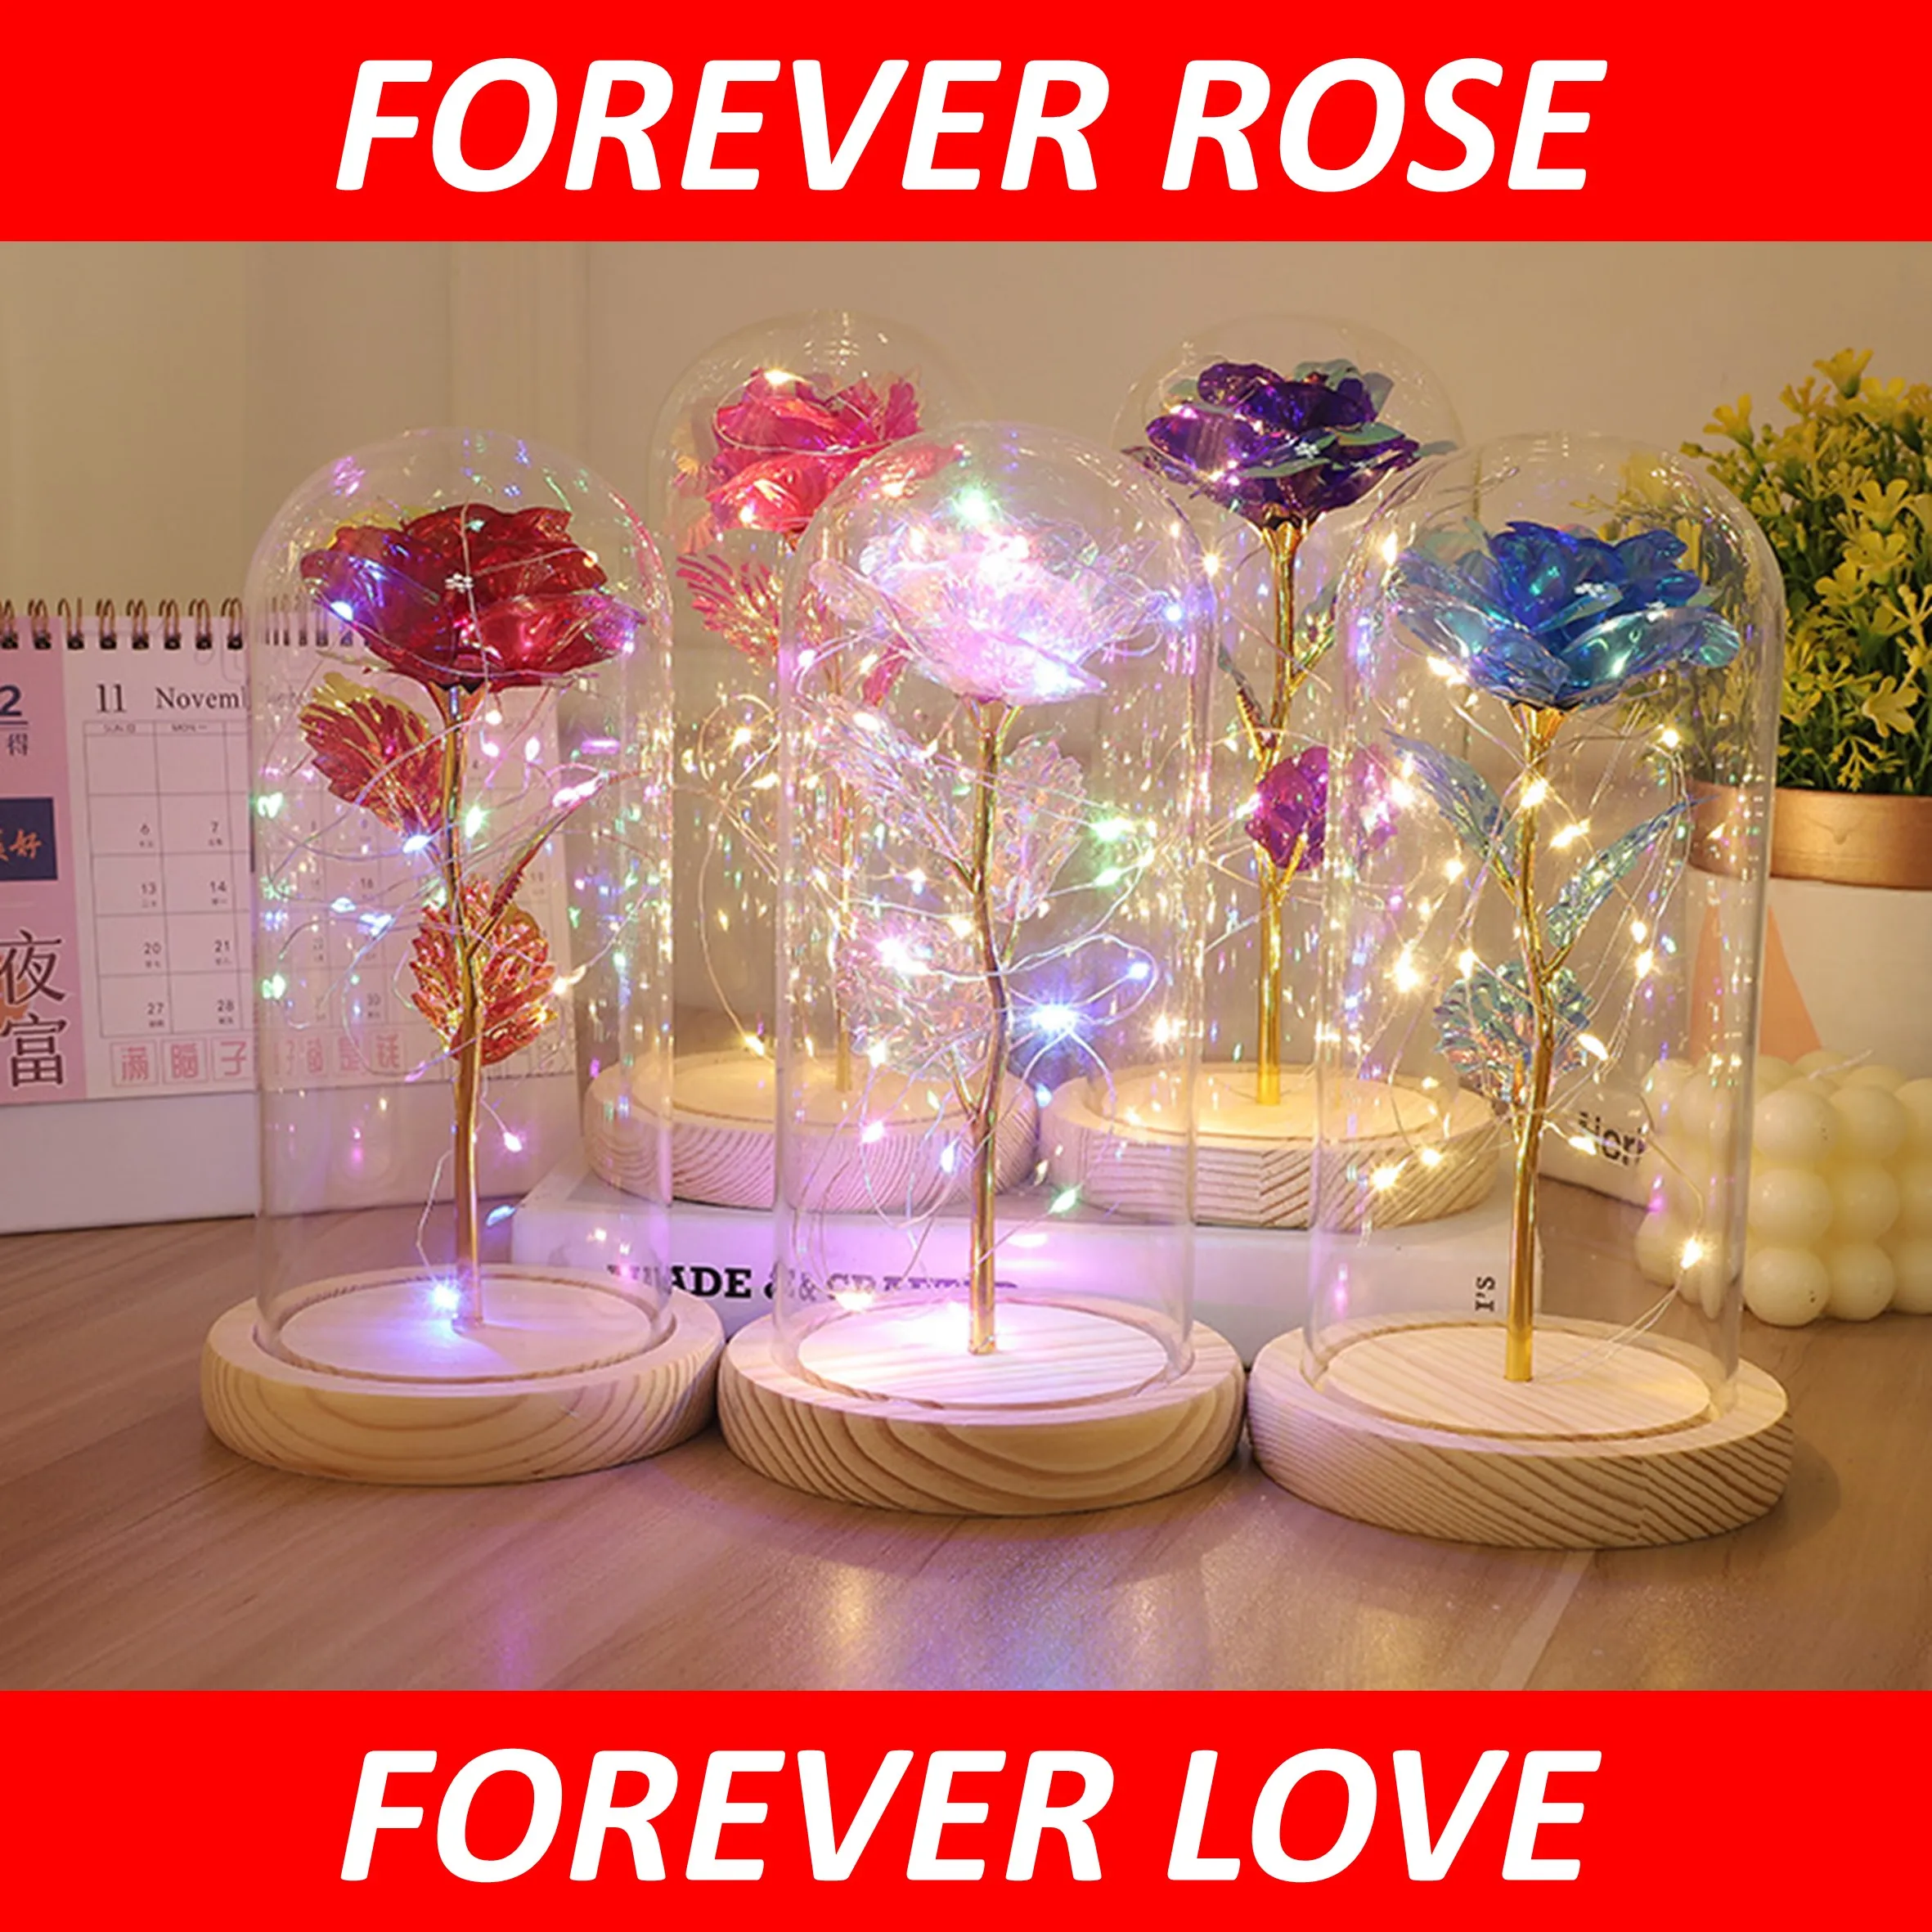 

LED Lighting Forever Love 24K Gold Foil Plated Rose Wedding Decor Lover Romantic Gift For Valentines Mothers Day With Gift Card